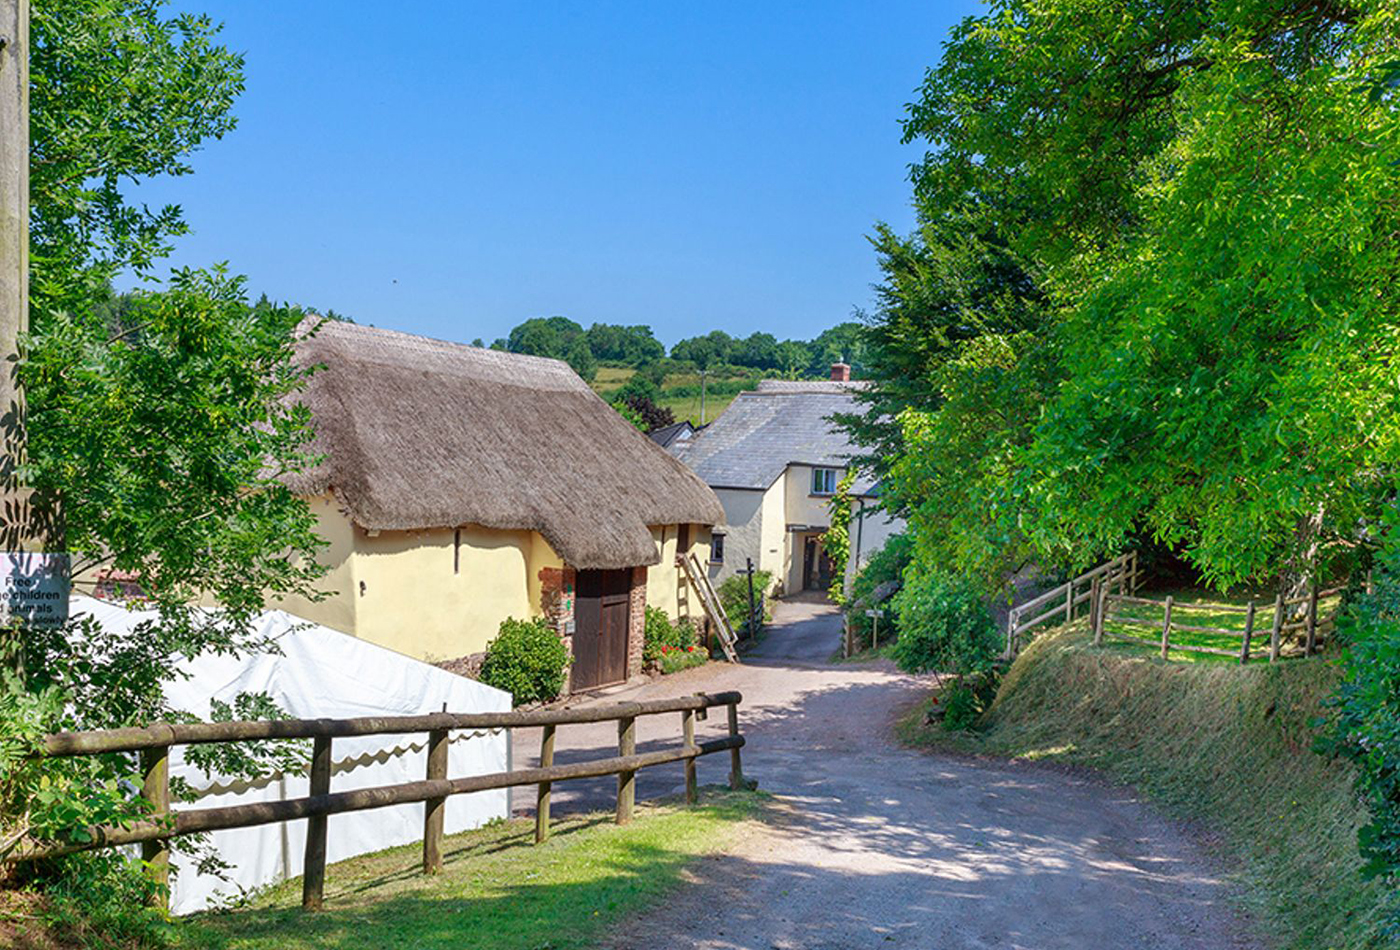 Get your holiday property ready for spring - Middle Coombe Farm